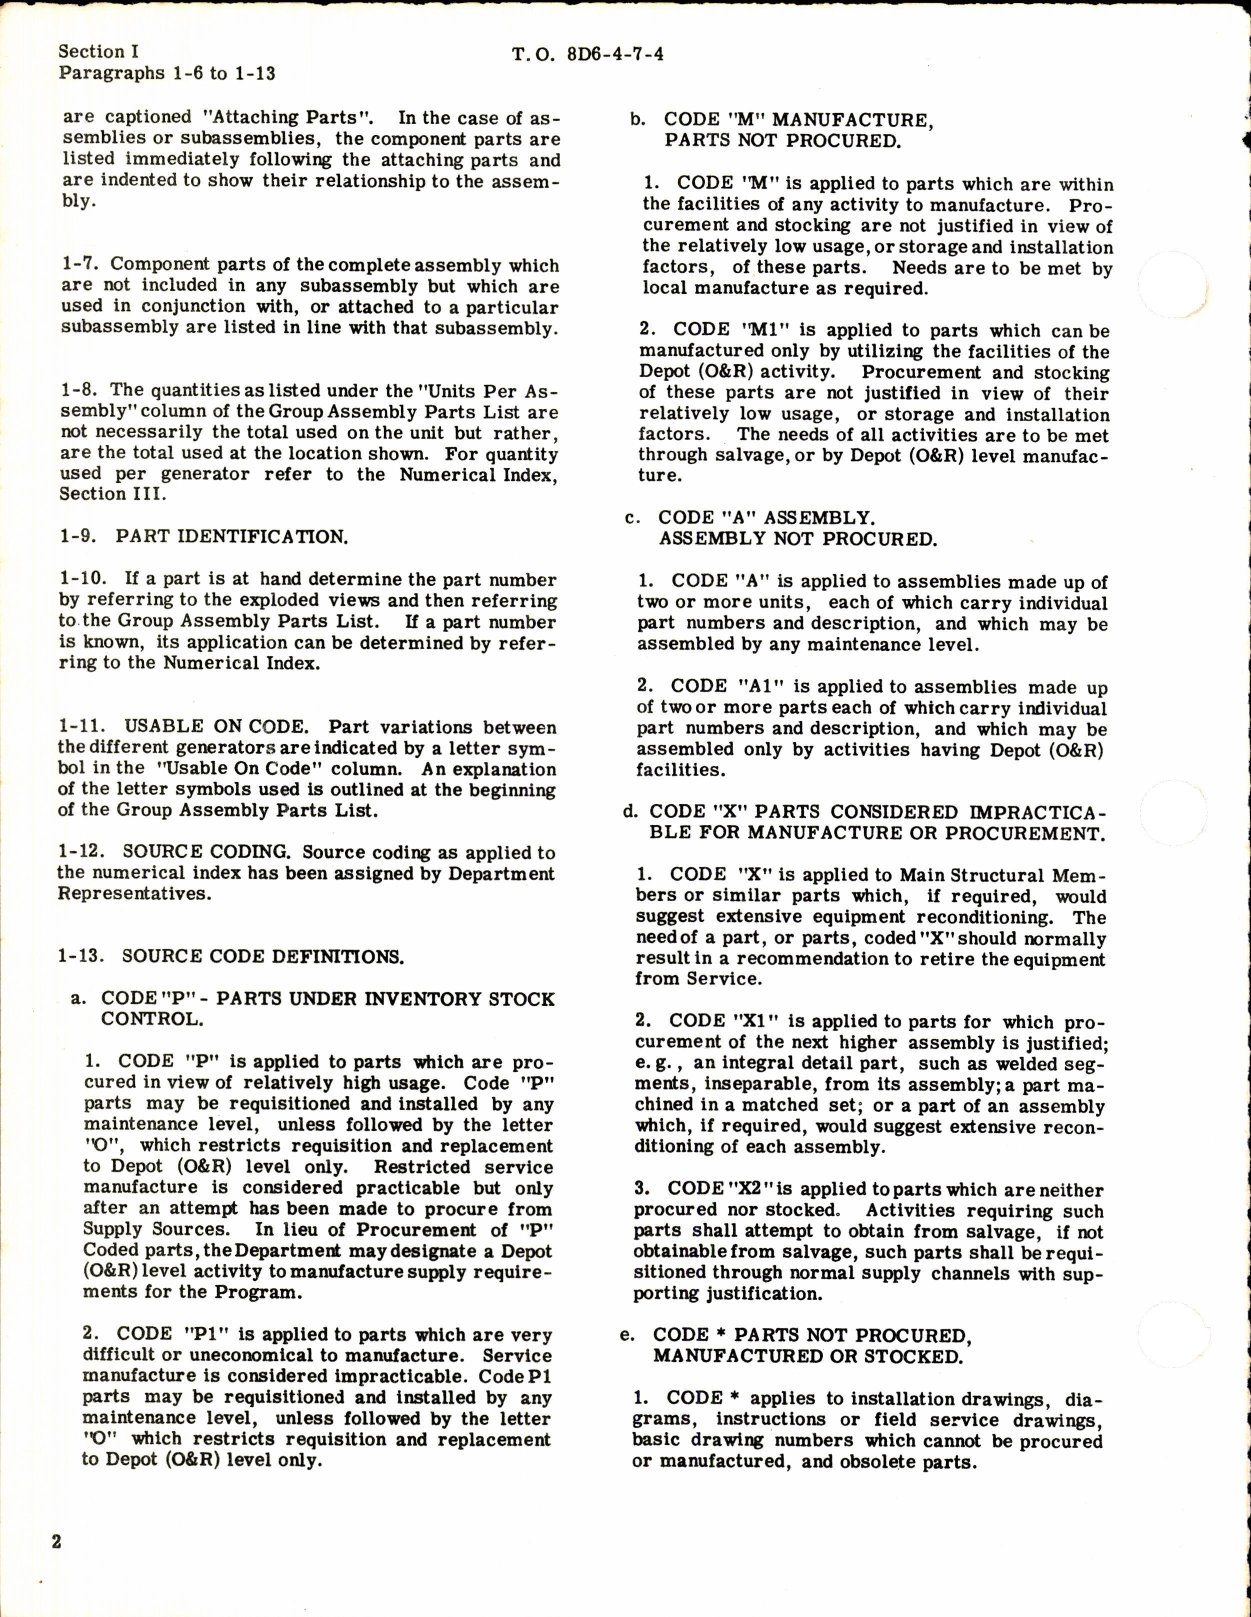 Sample page 4 from AirCorps Library document: D-C Generator Type P-1 Part Number 7-A-5838-GR 1A